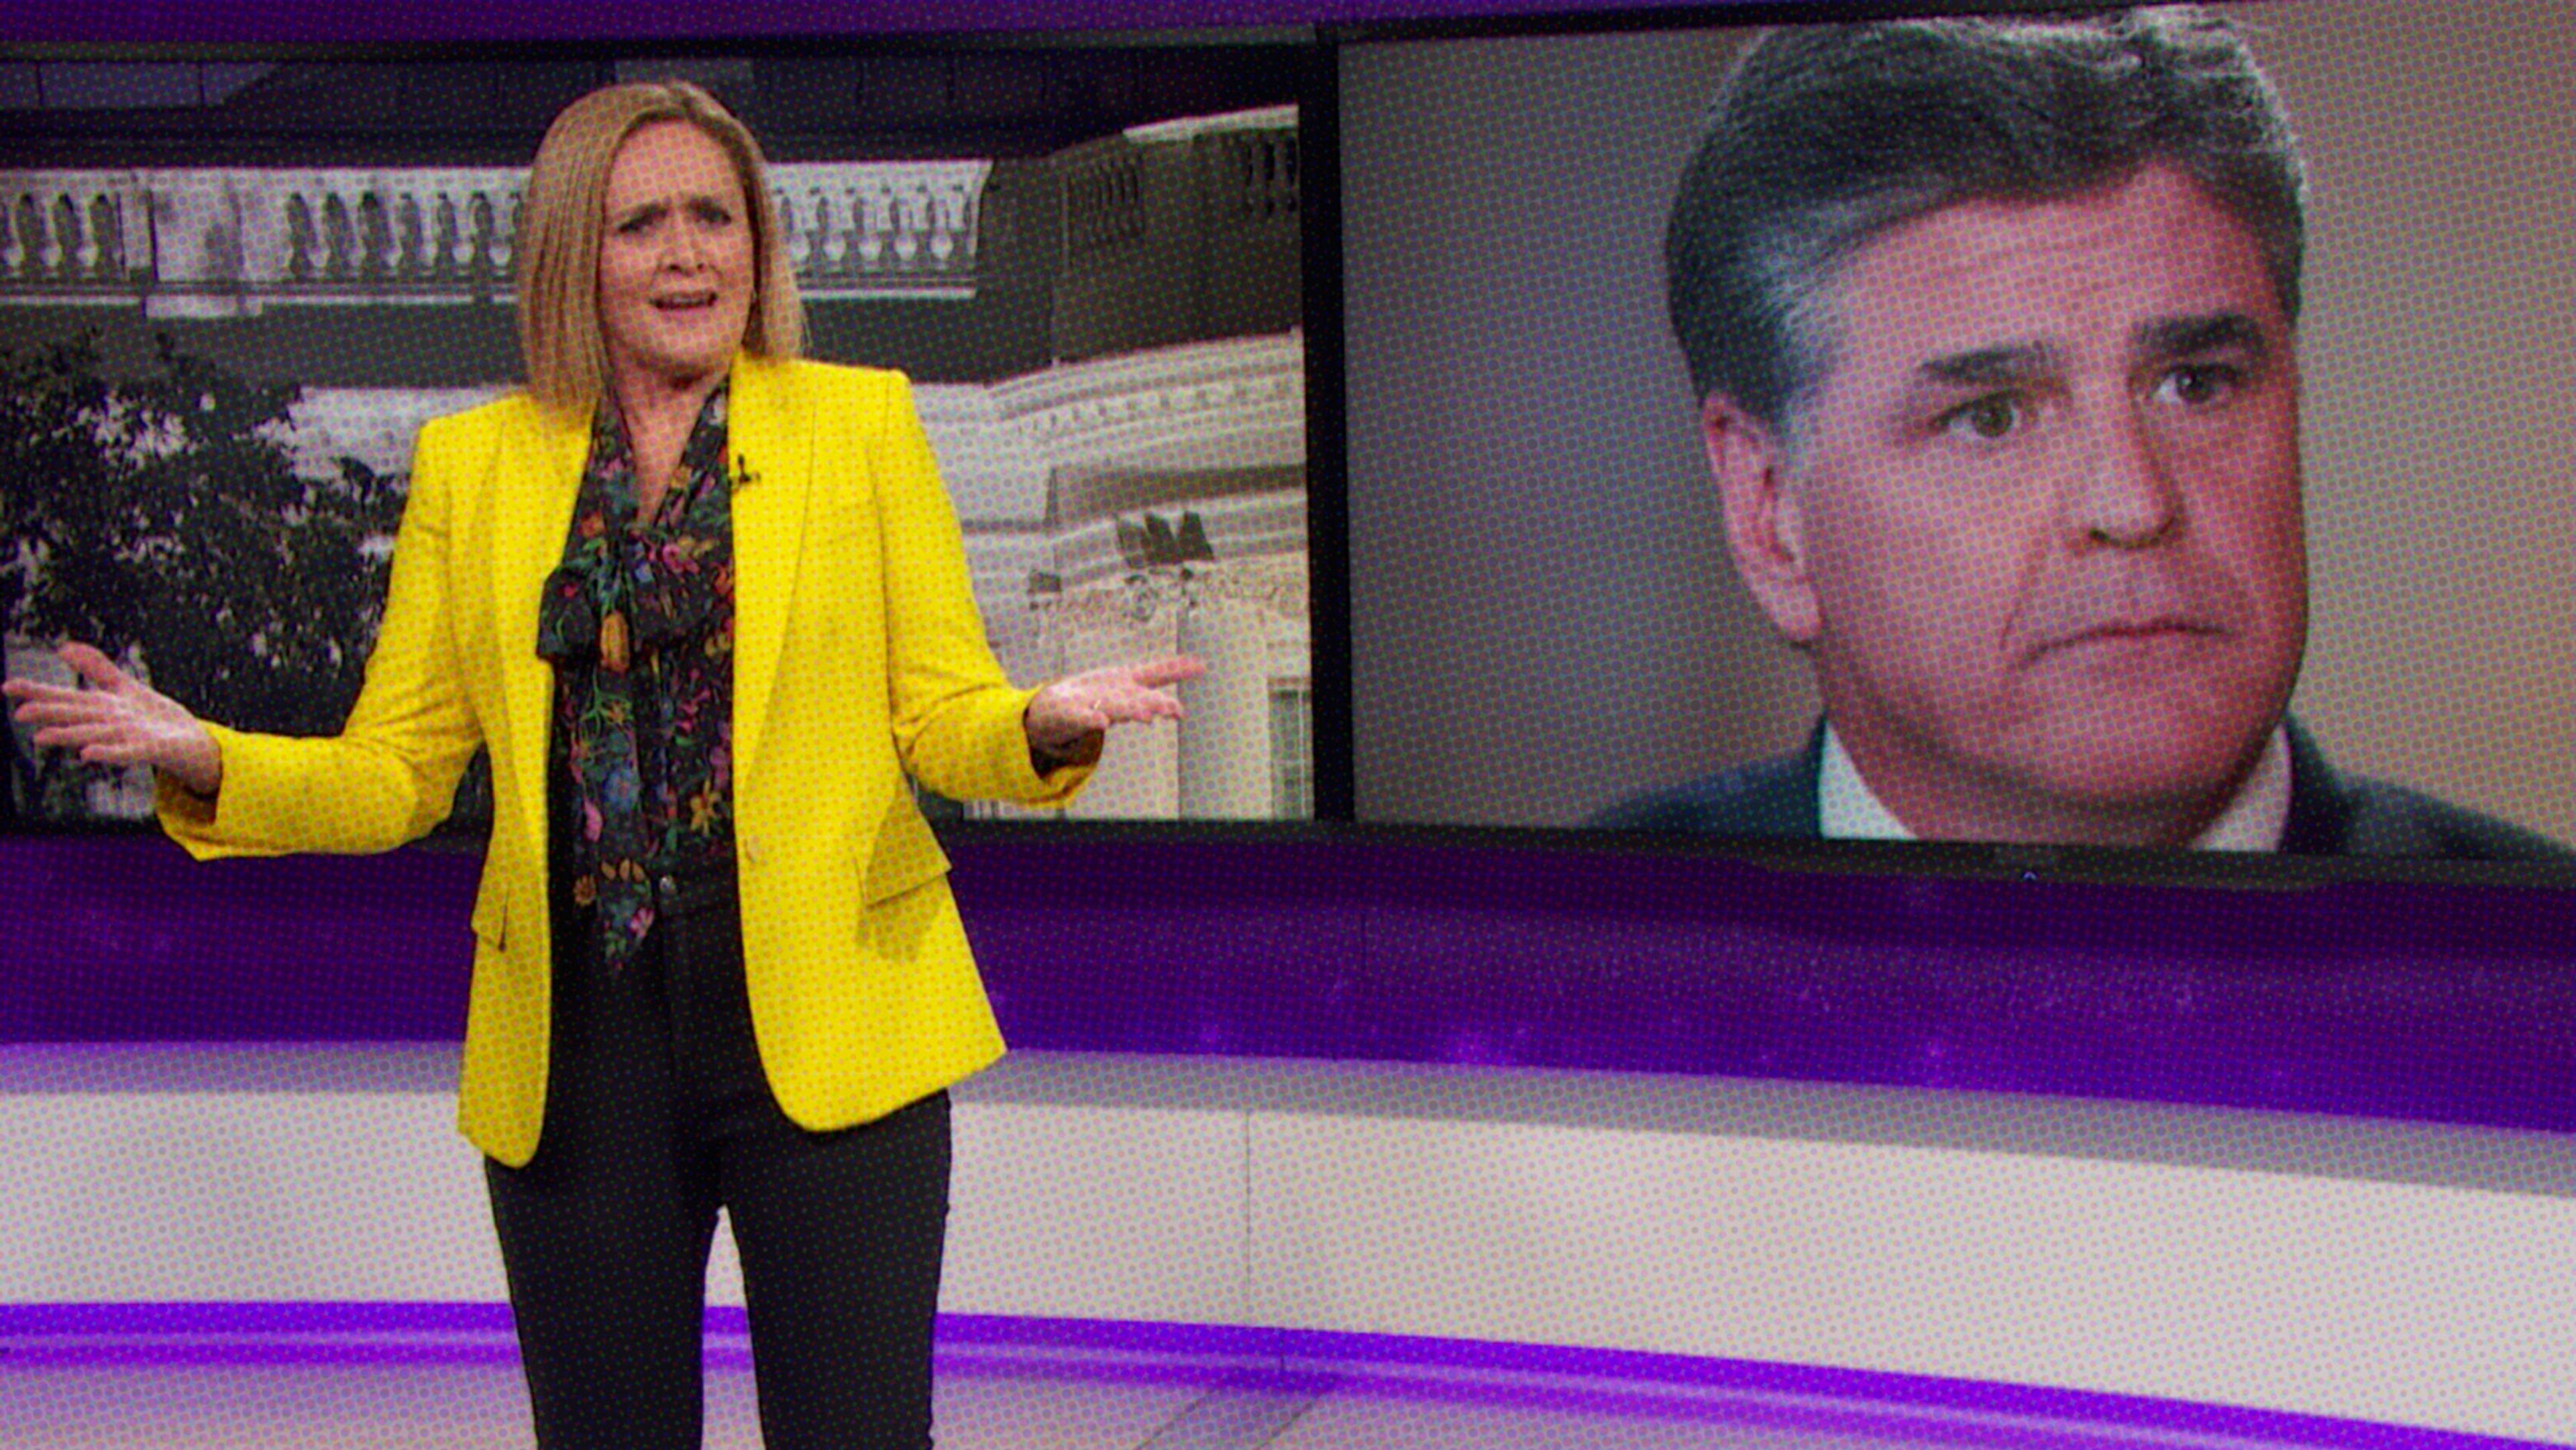 Samantha Bee Uses Hannity’s Own Tactics To “Prove” He’s A Serial Killer